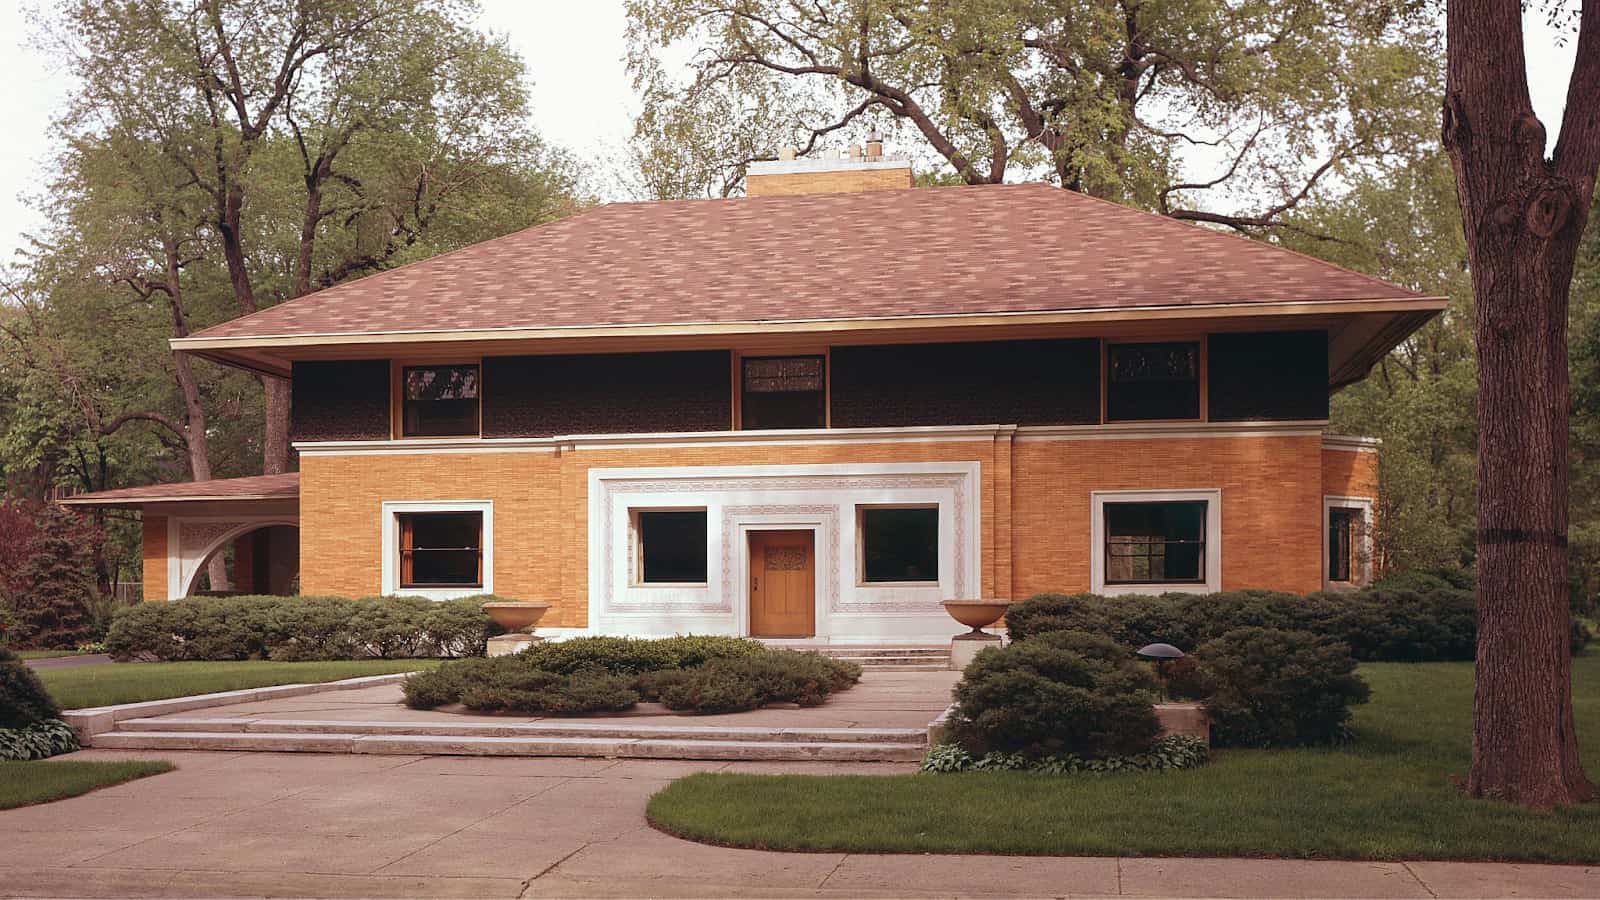 Frank Lloyd Wright’s first “Prairie House,” built in 1893–94. Wright would go on to exemplify the “new architecture” first called for by Viollet-le-Duc: putting modern materials, construction methods, and ideologies together in accessible ways. Photo by Hedrich Blessing Collection / Chicago History Museum / Getty Images